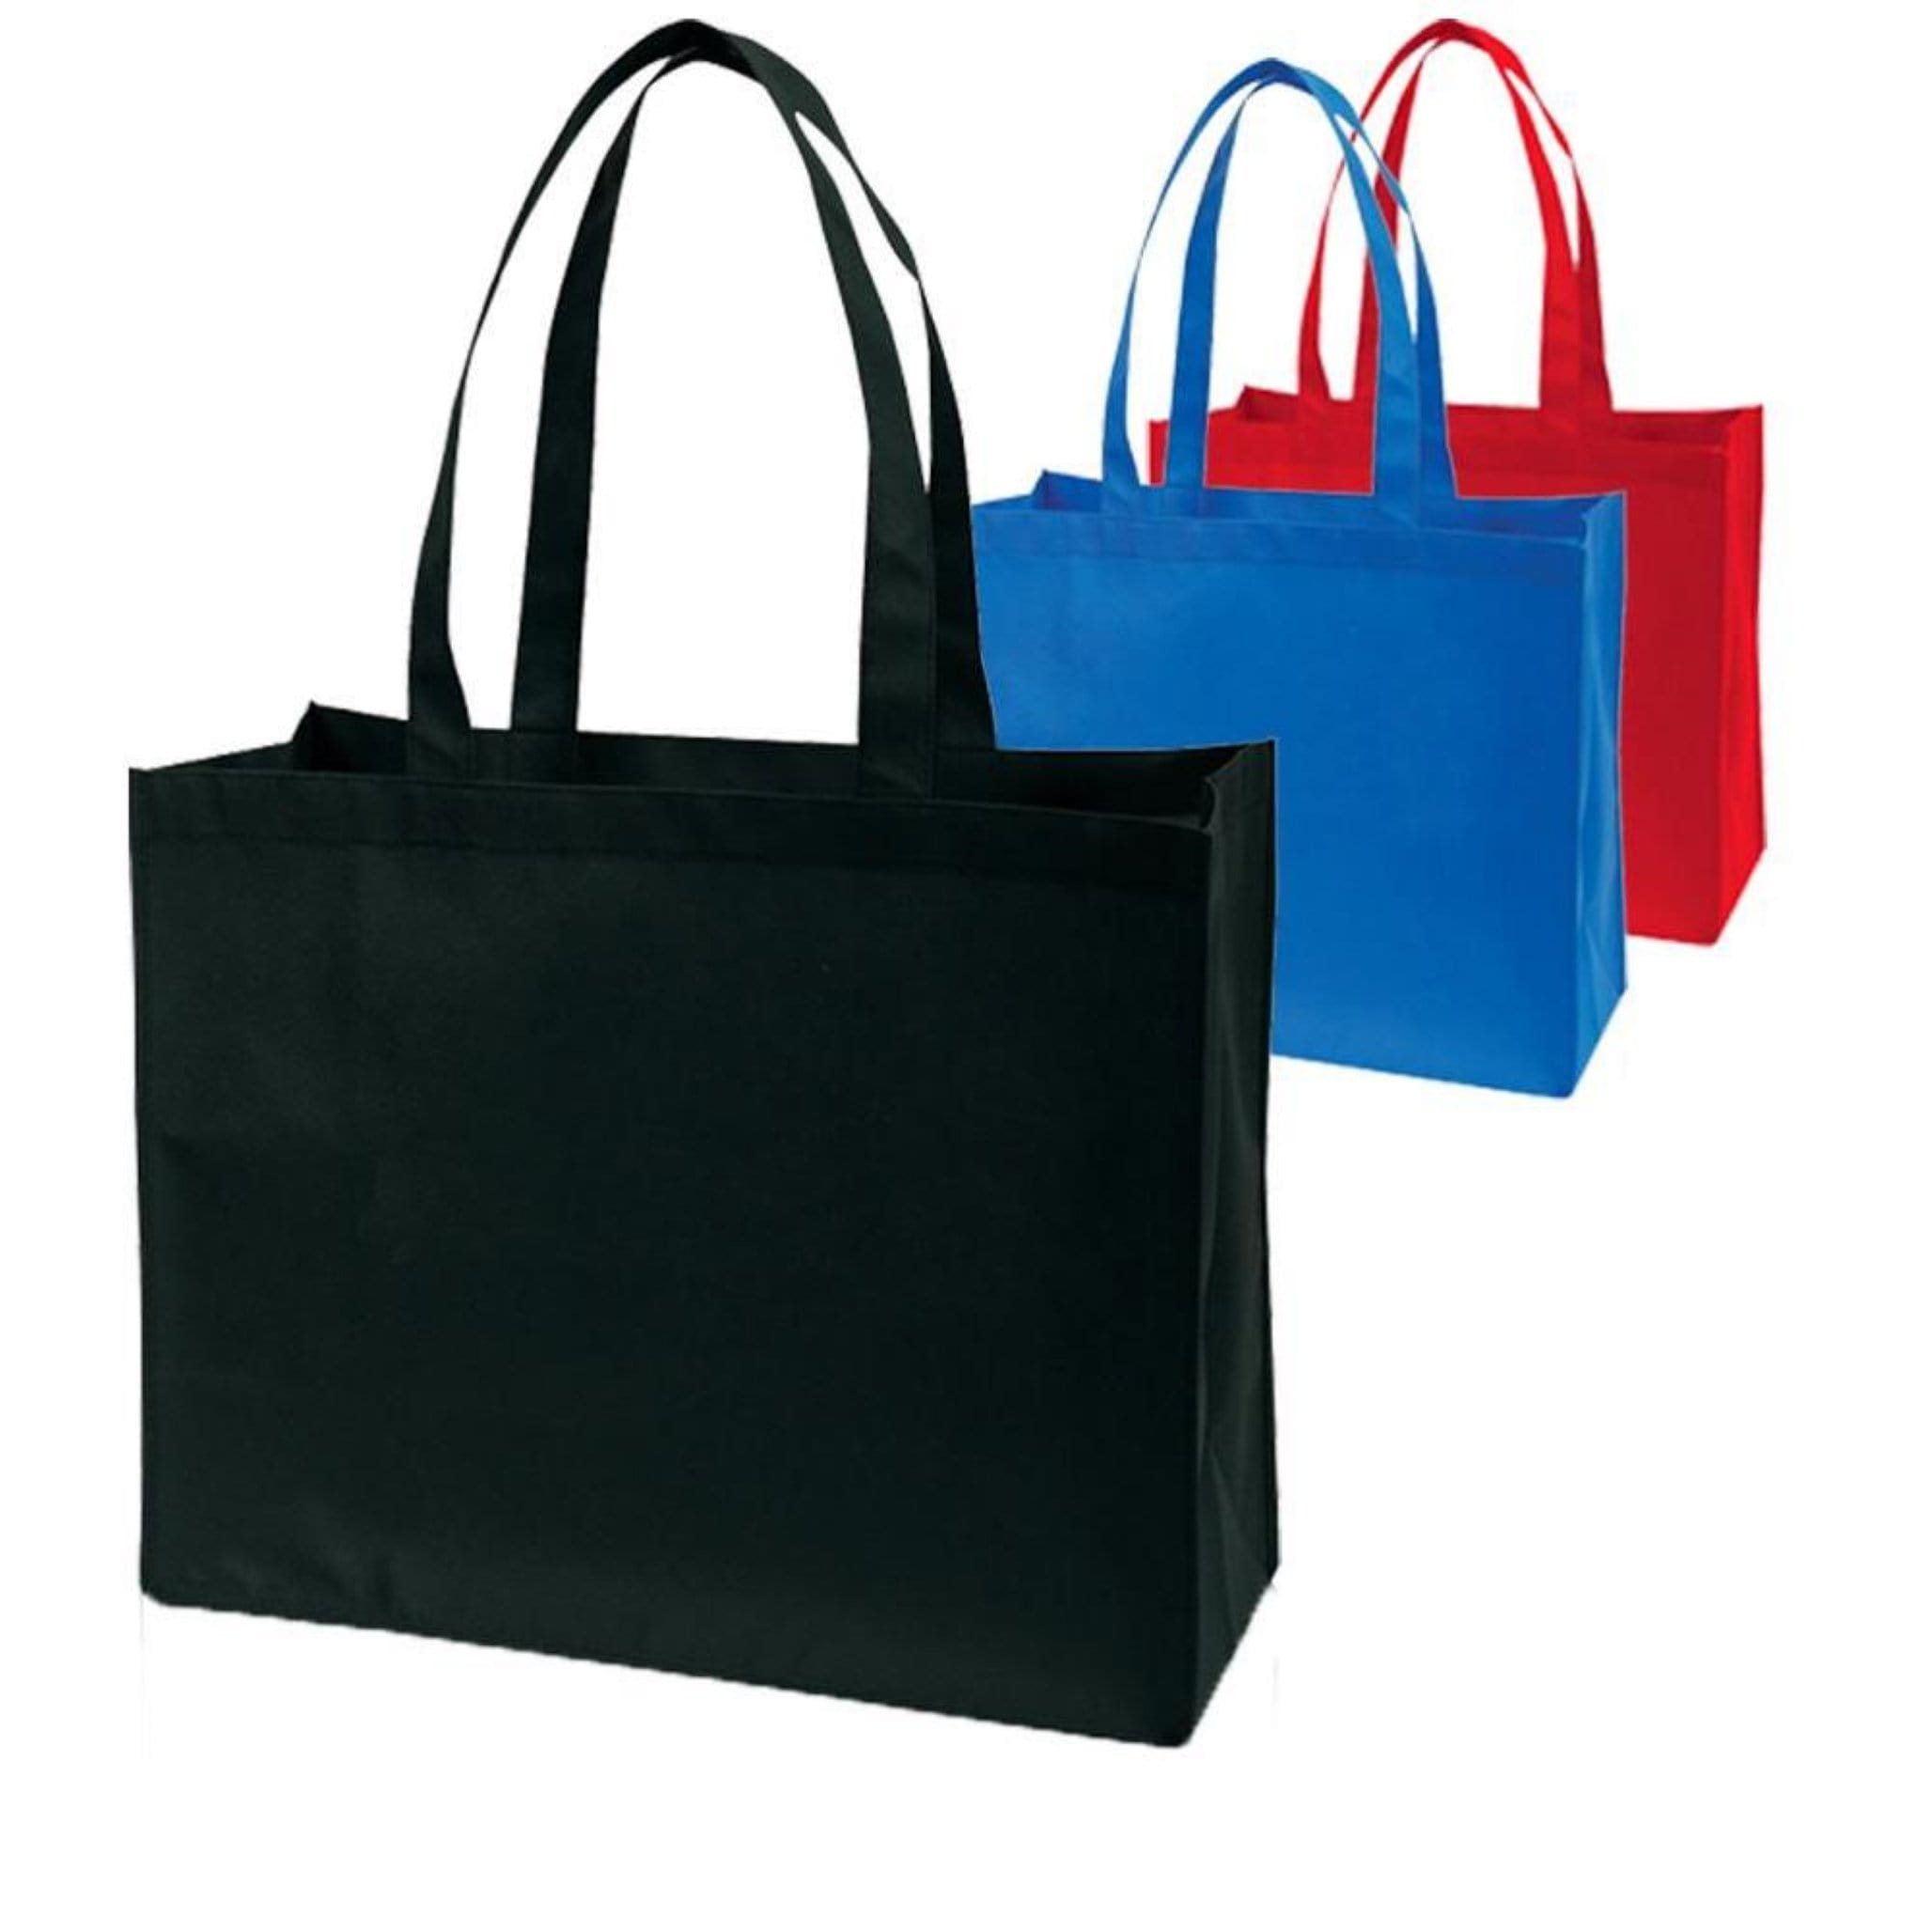 Reusable shopping tote bag - Heavy-Duty 20Wx16Hx6D 25, 50, 100, and 250Pcs Ampack